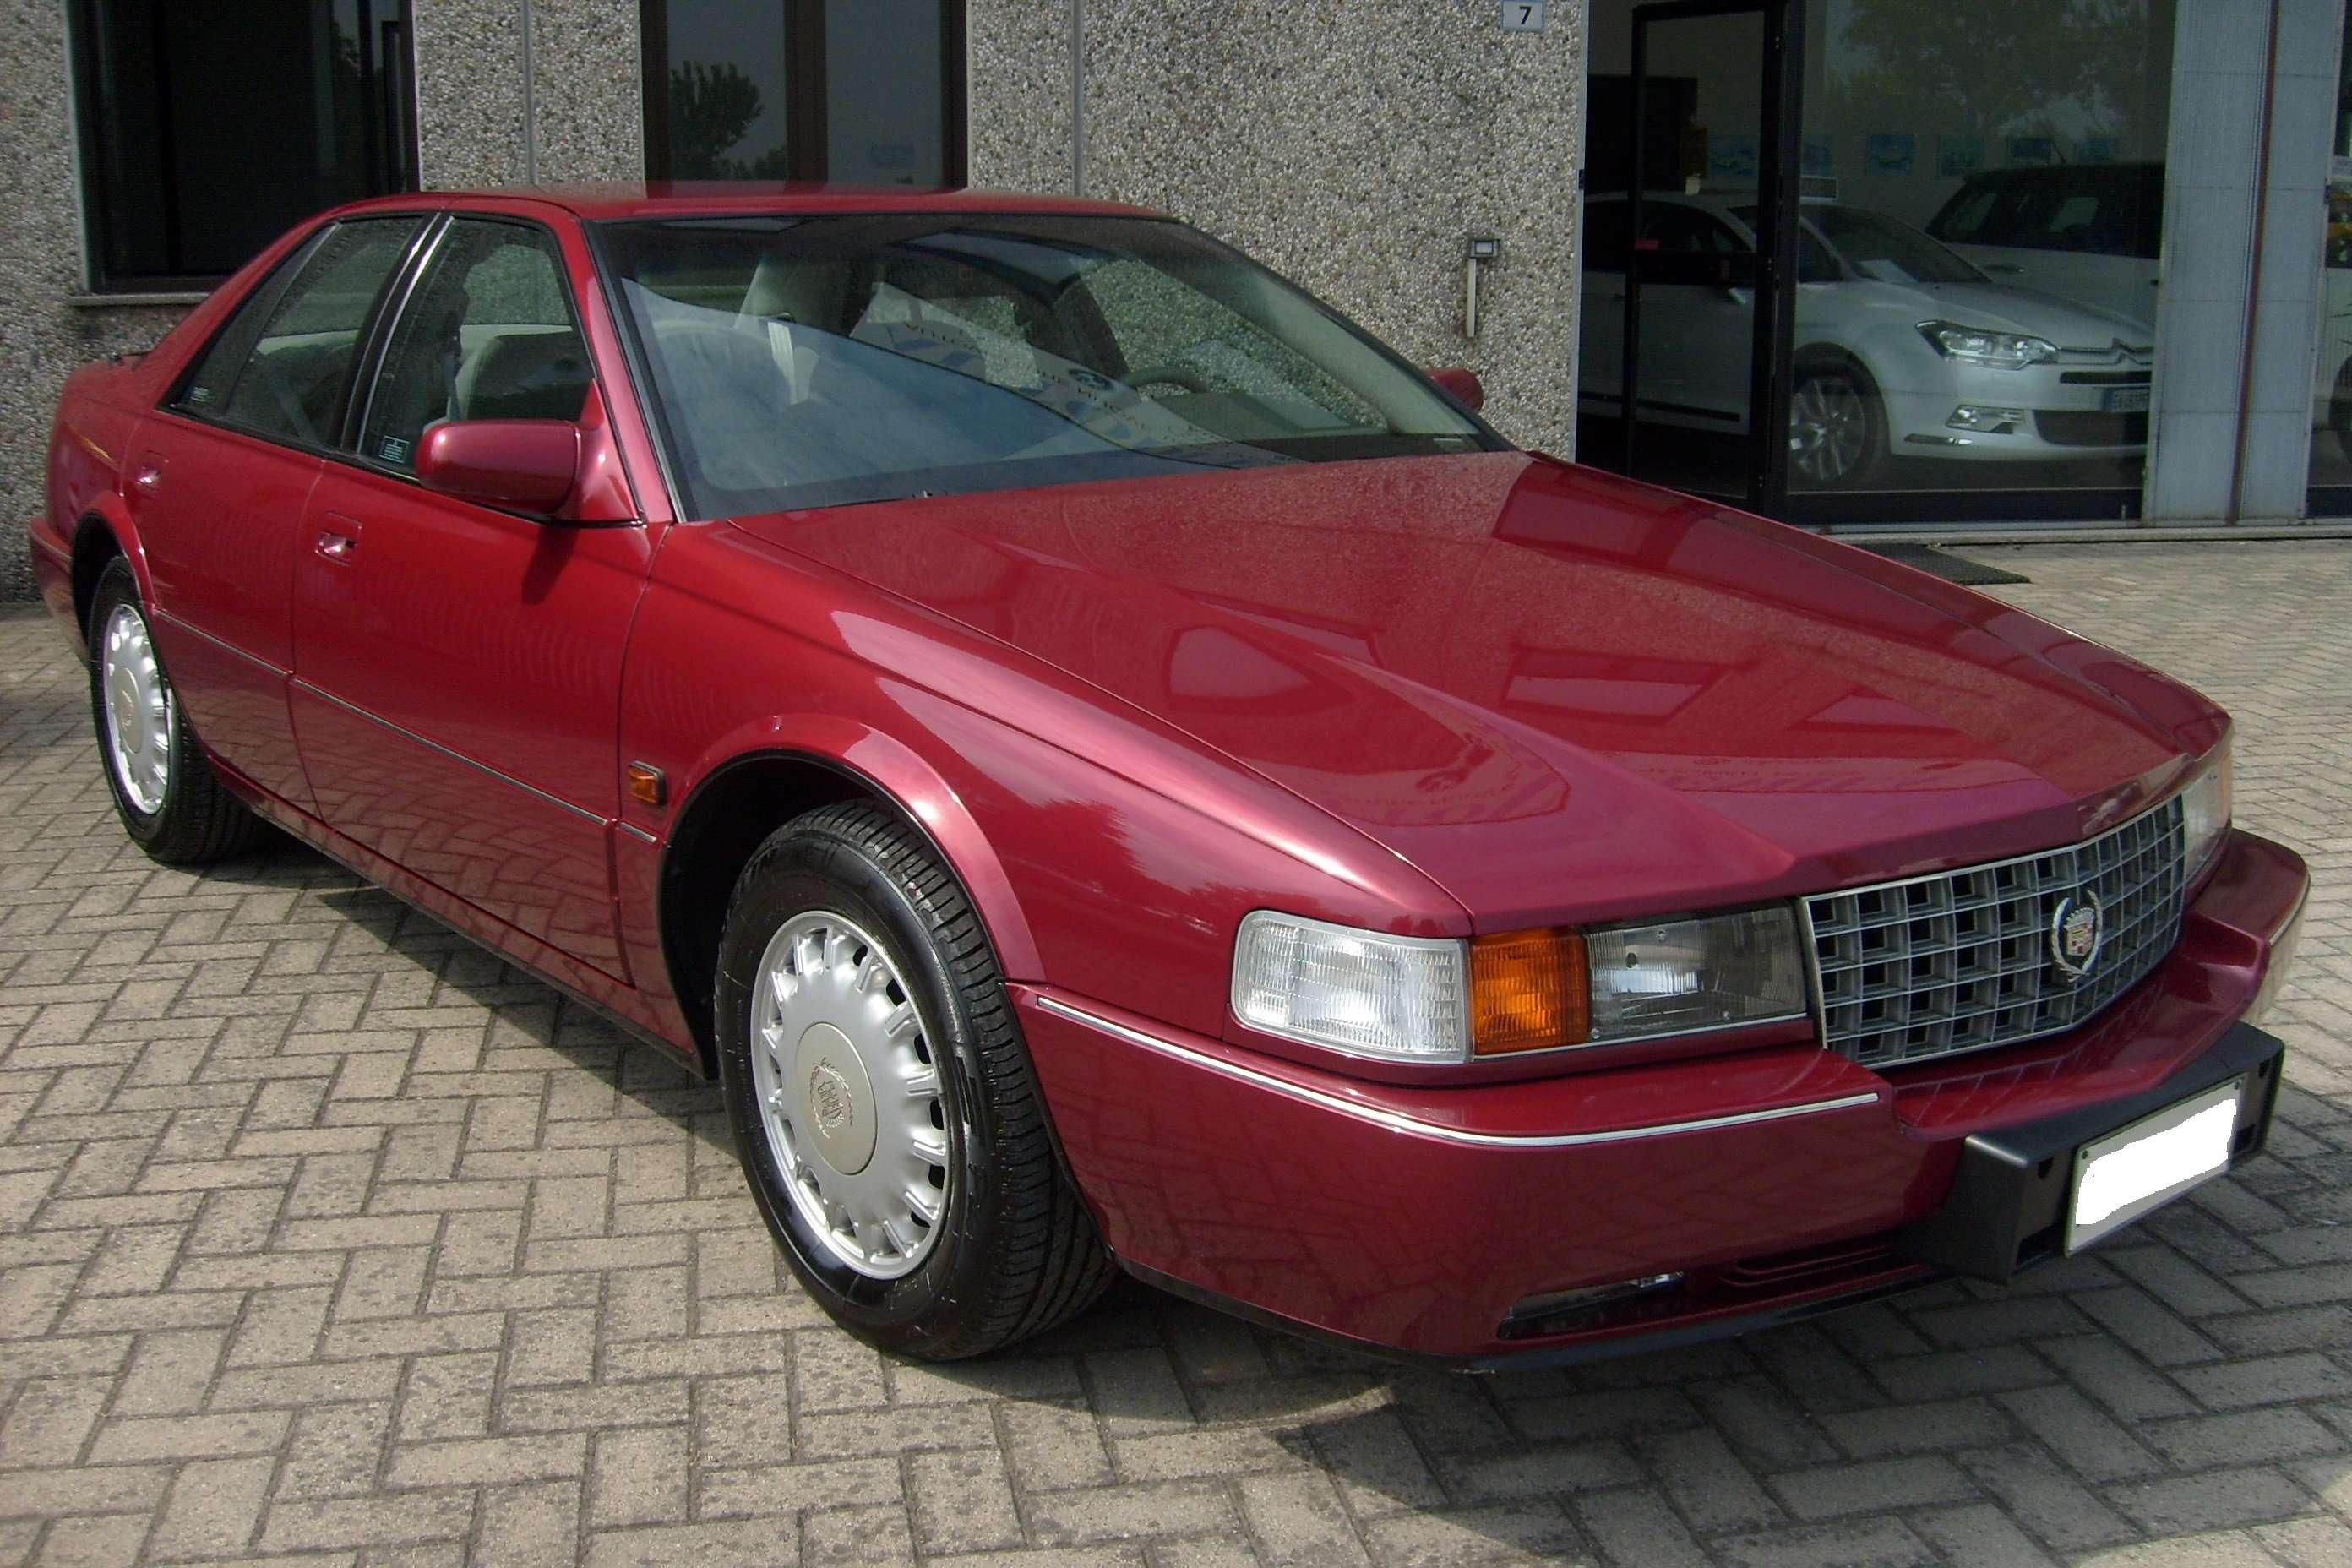 Cadillac Seville Sedan in Red used in Cadeo - Piacenza - Pc for € 13,500.-